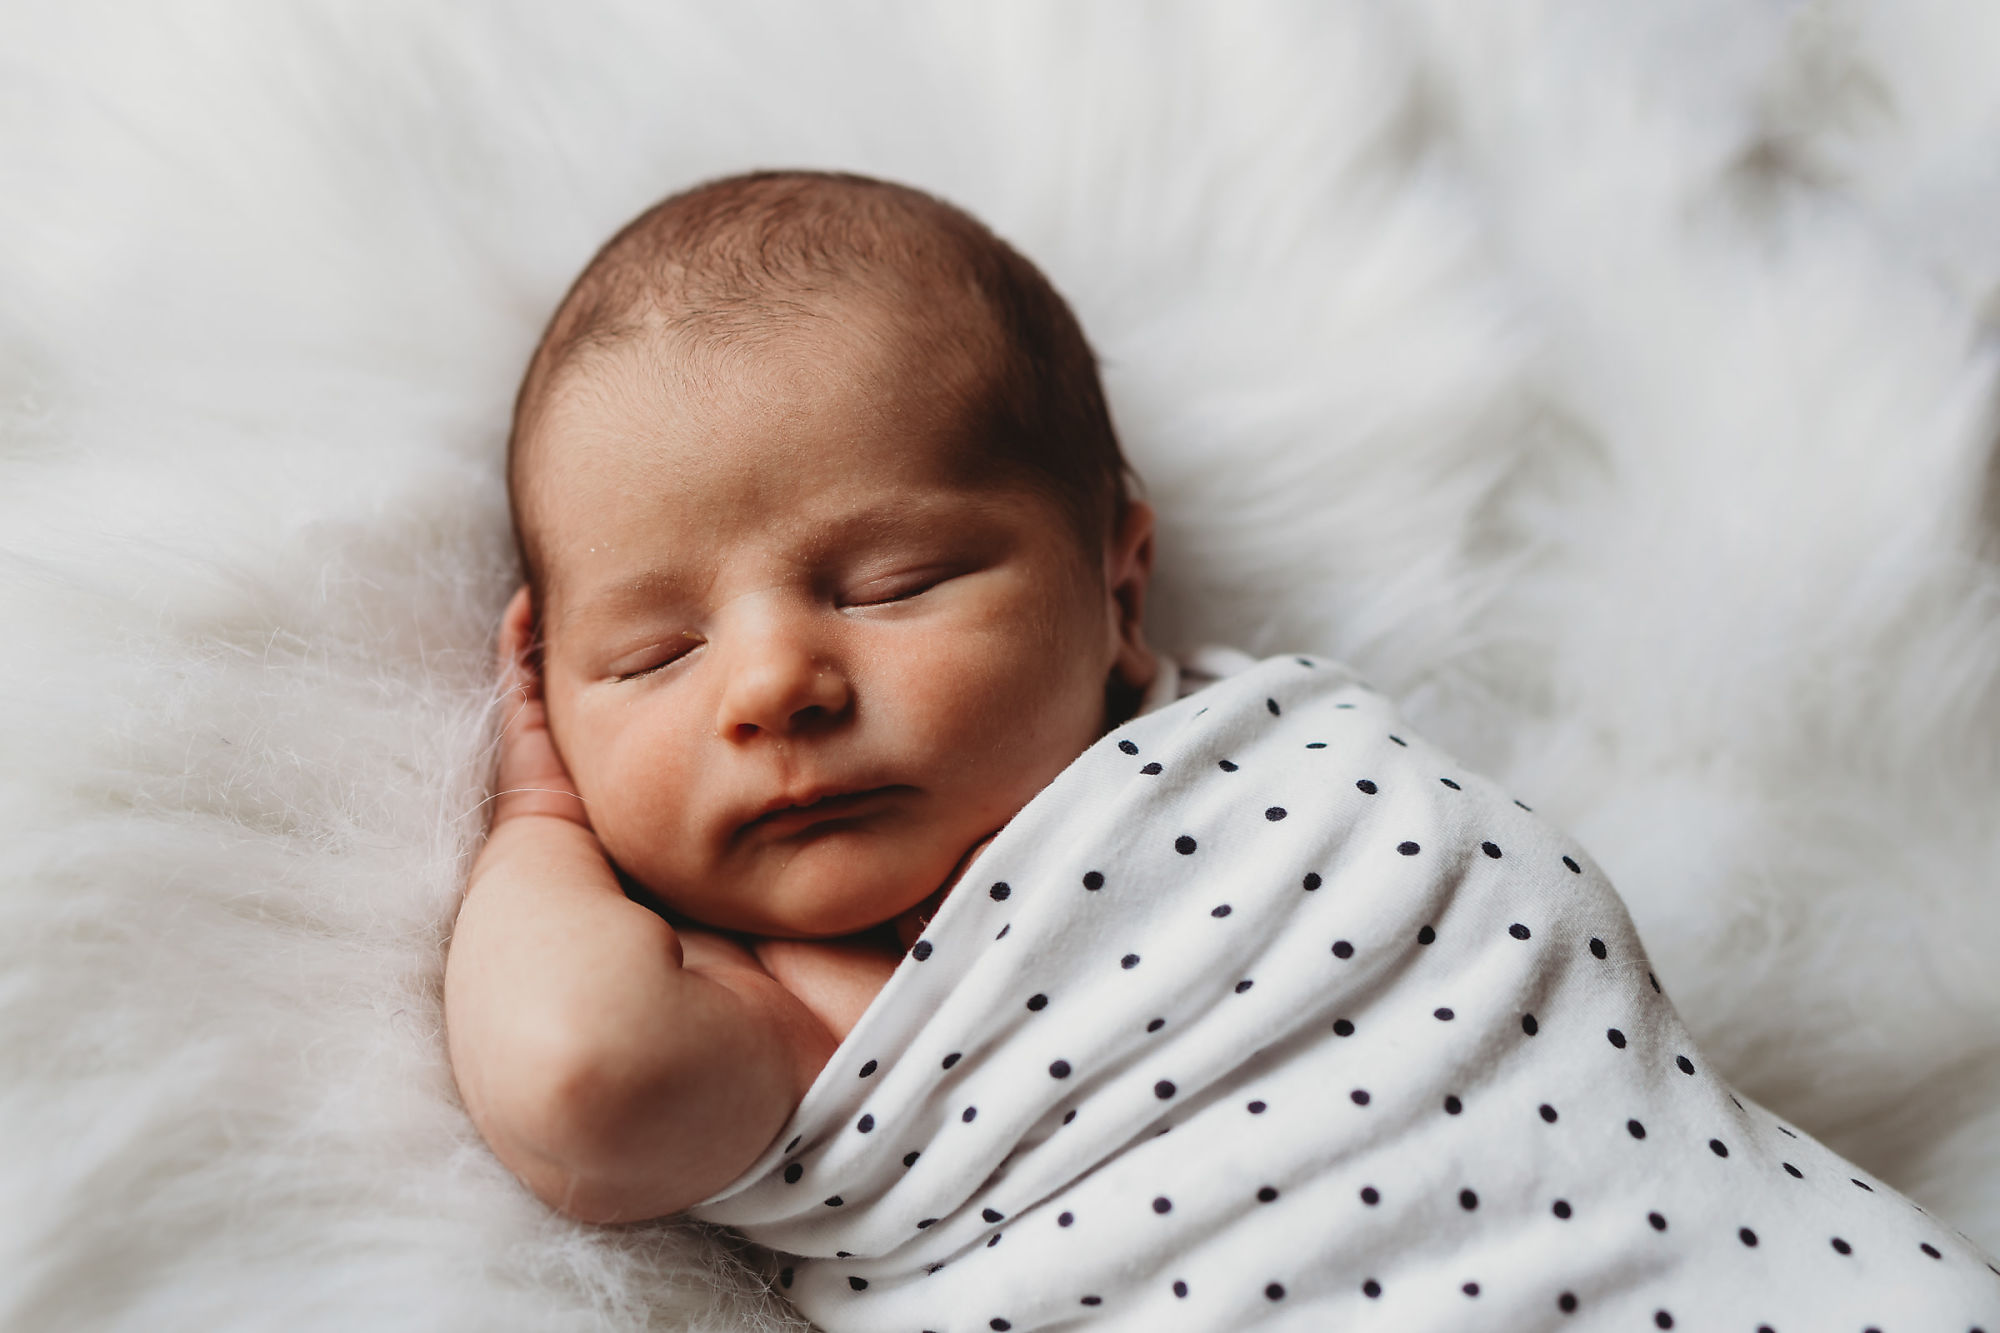 Dundas Newborn Photographer Jennifer Blaak photographs a peaceful moment for baby during their newborn and family lifestyle photography session at home in Hamilton.